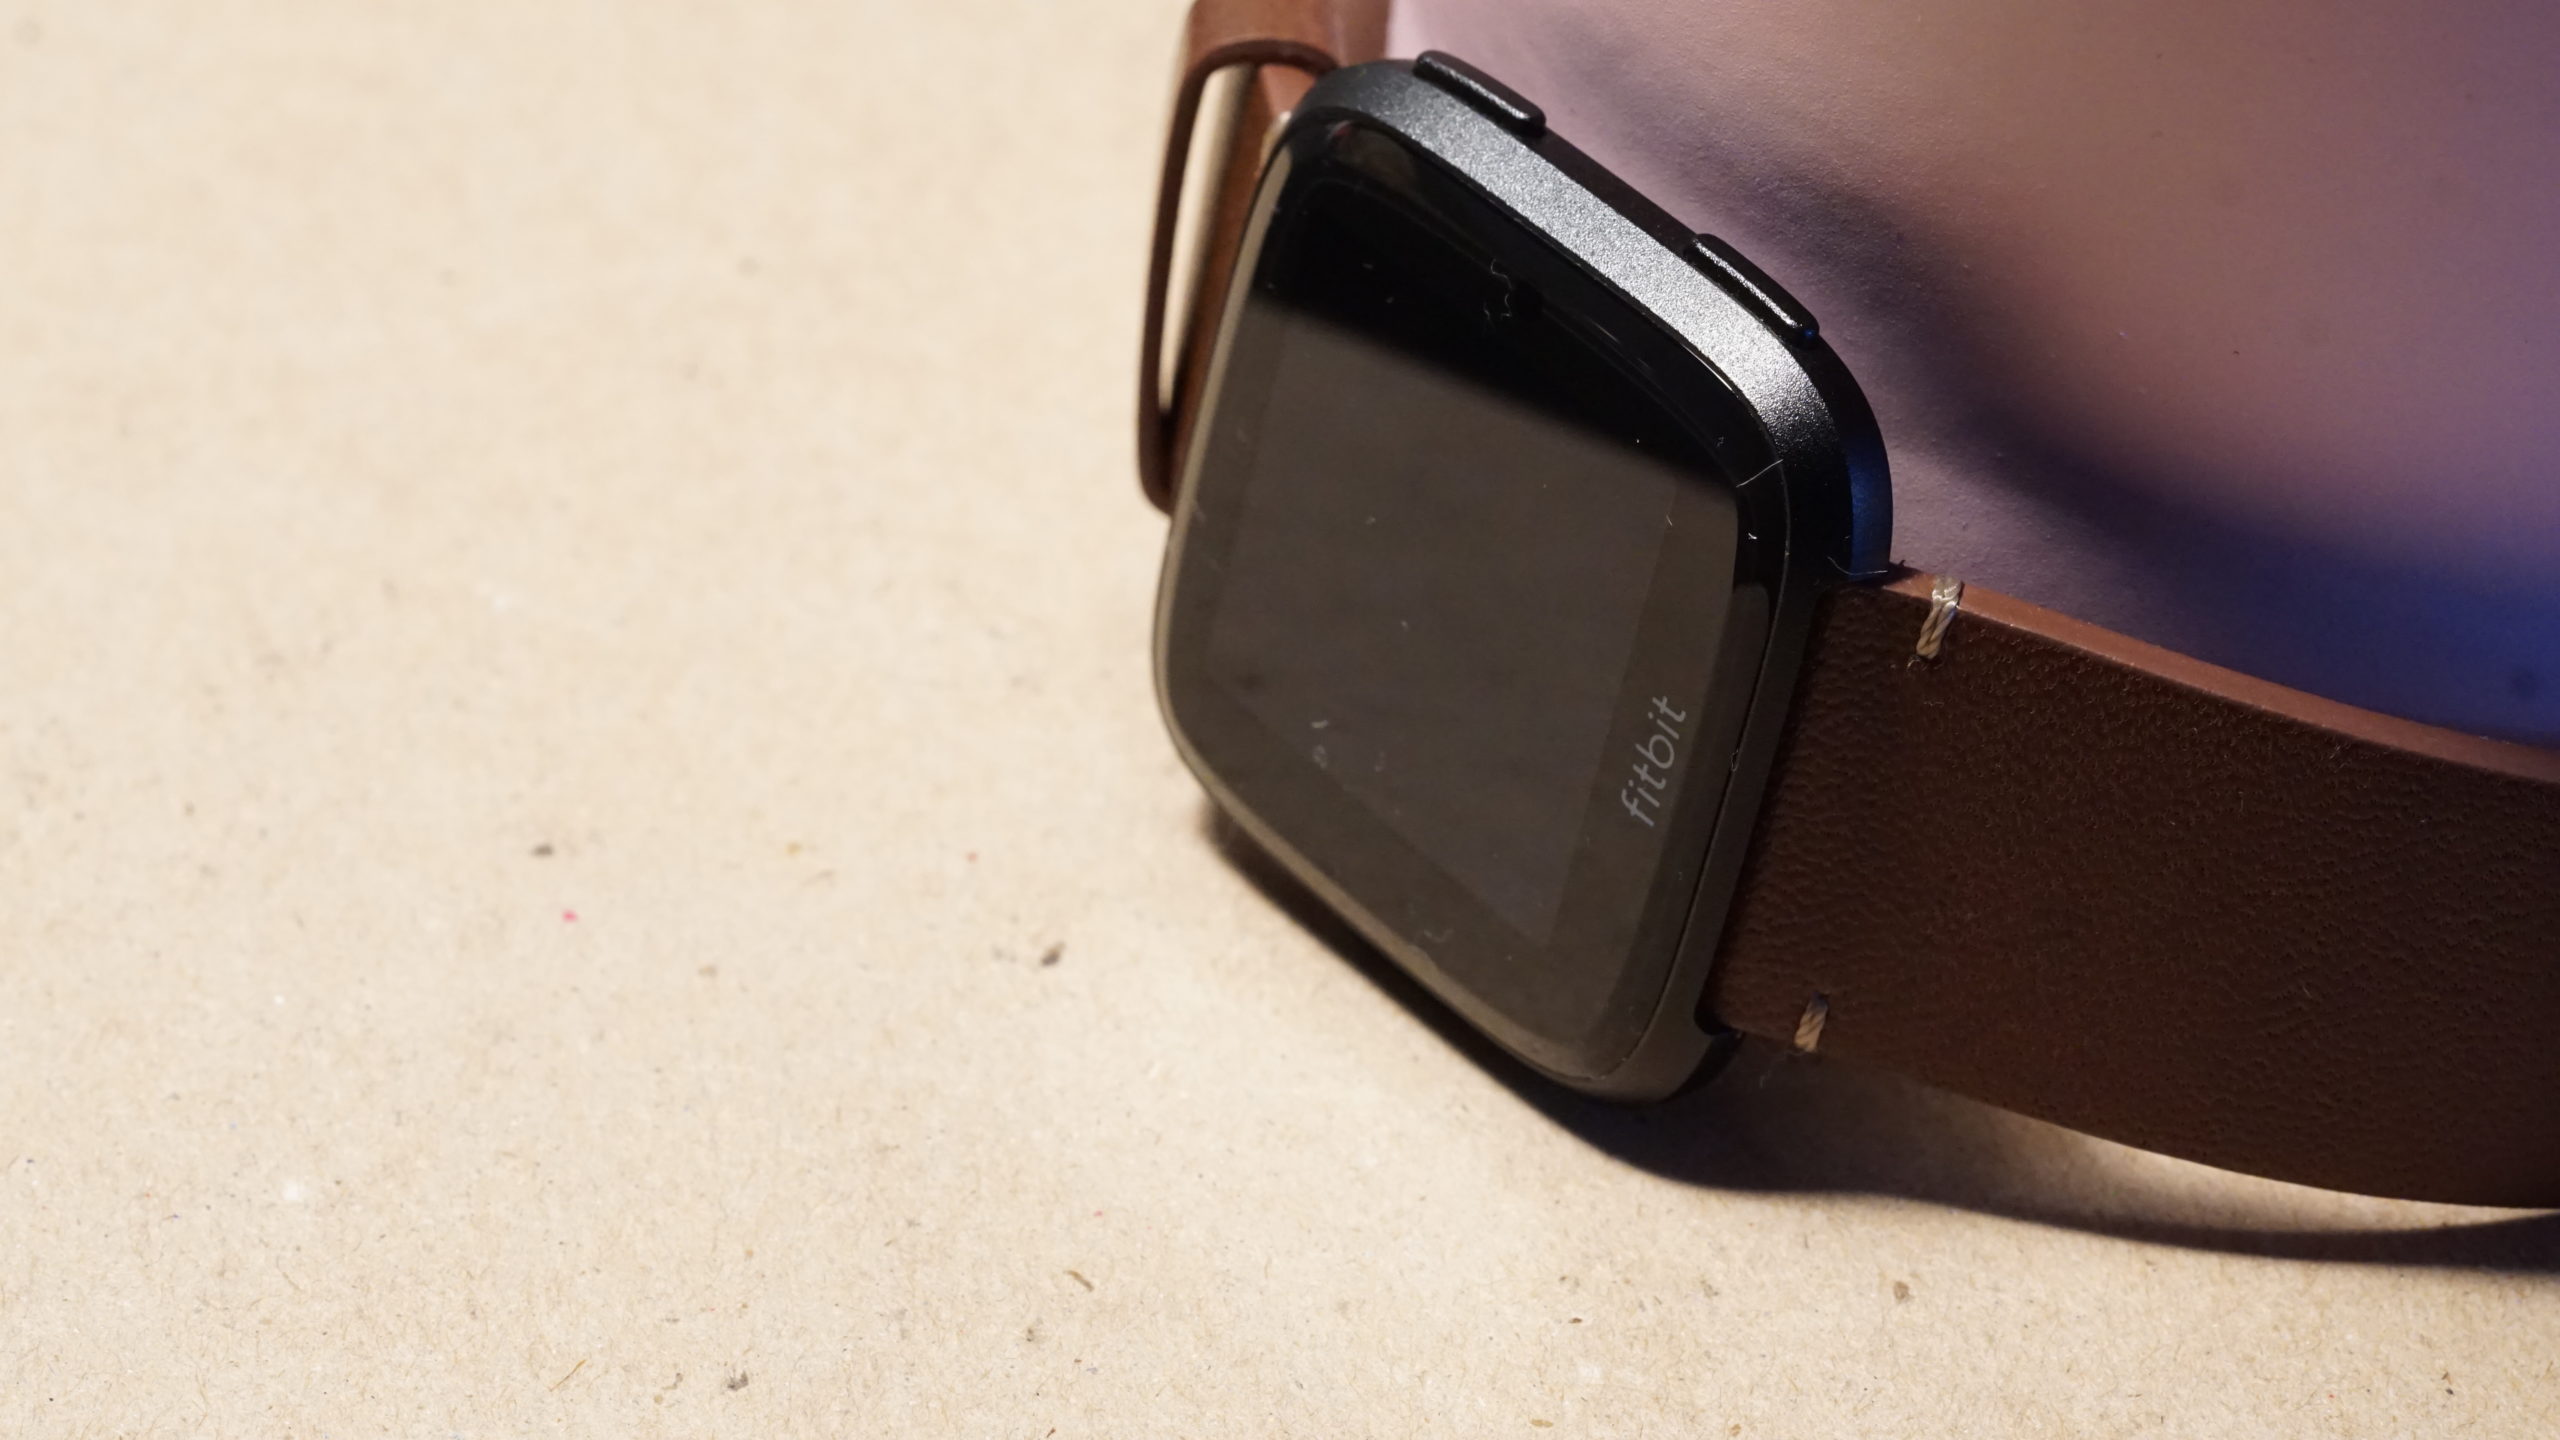 The Fitbit Versa Is The First Real Bargain Smartwatch